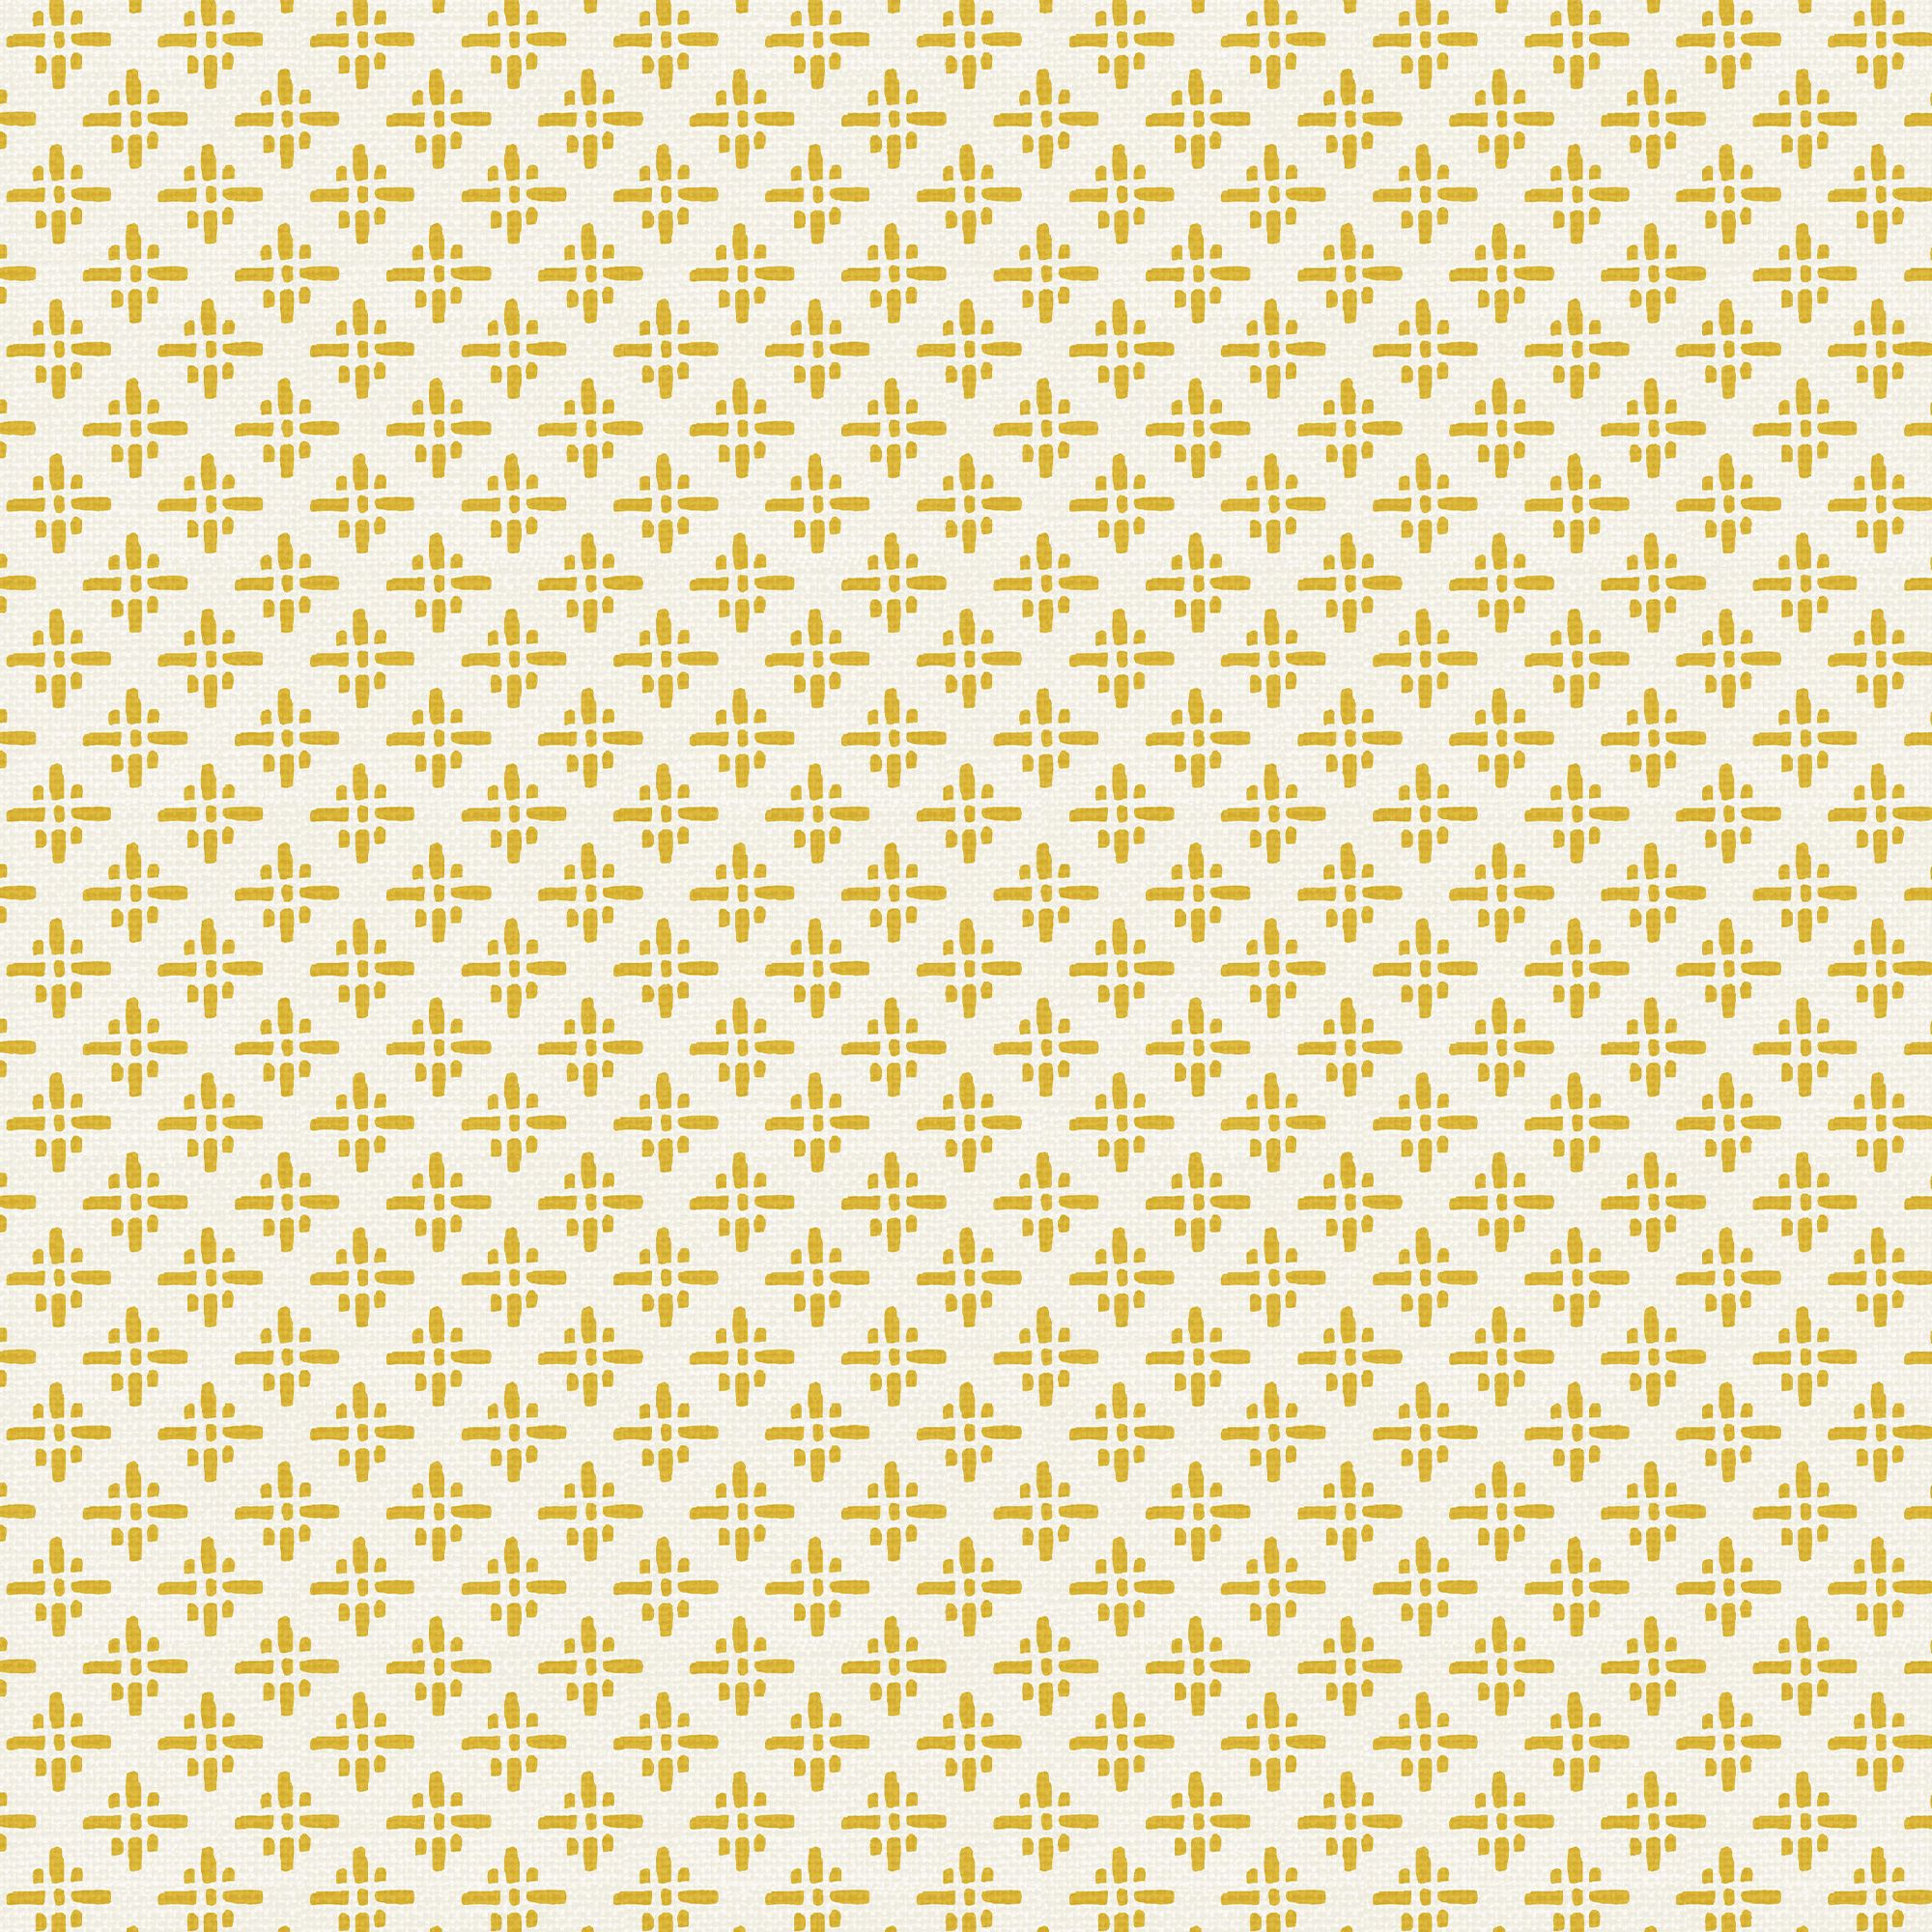 Joules Yellow Geometric Smooth Wallpaper Sample